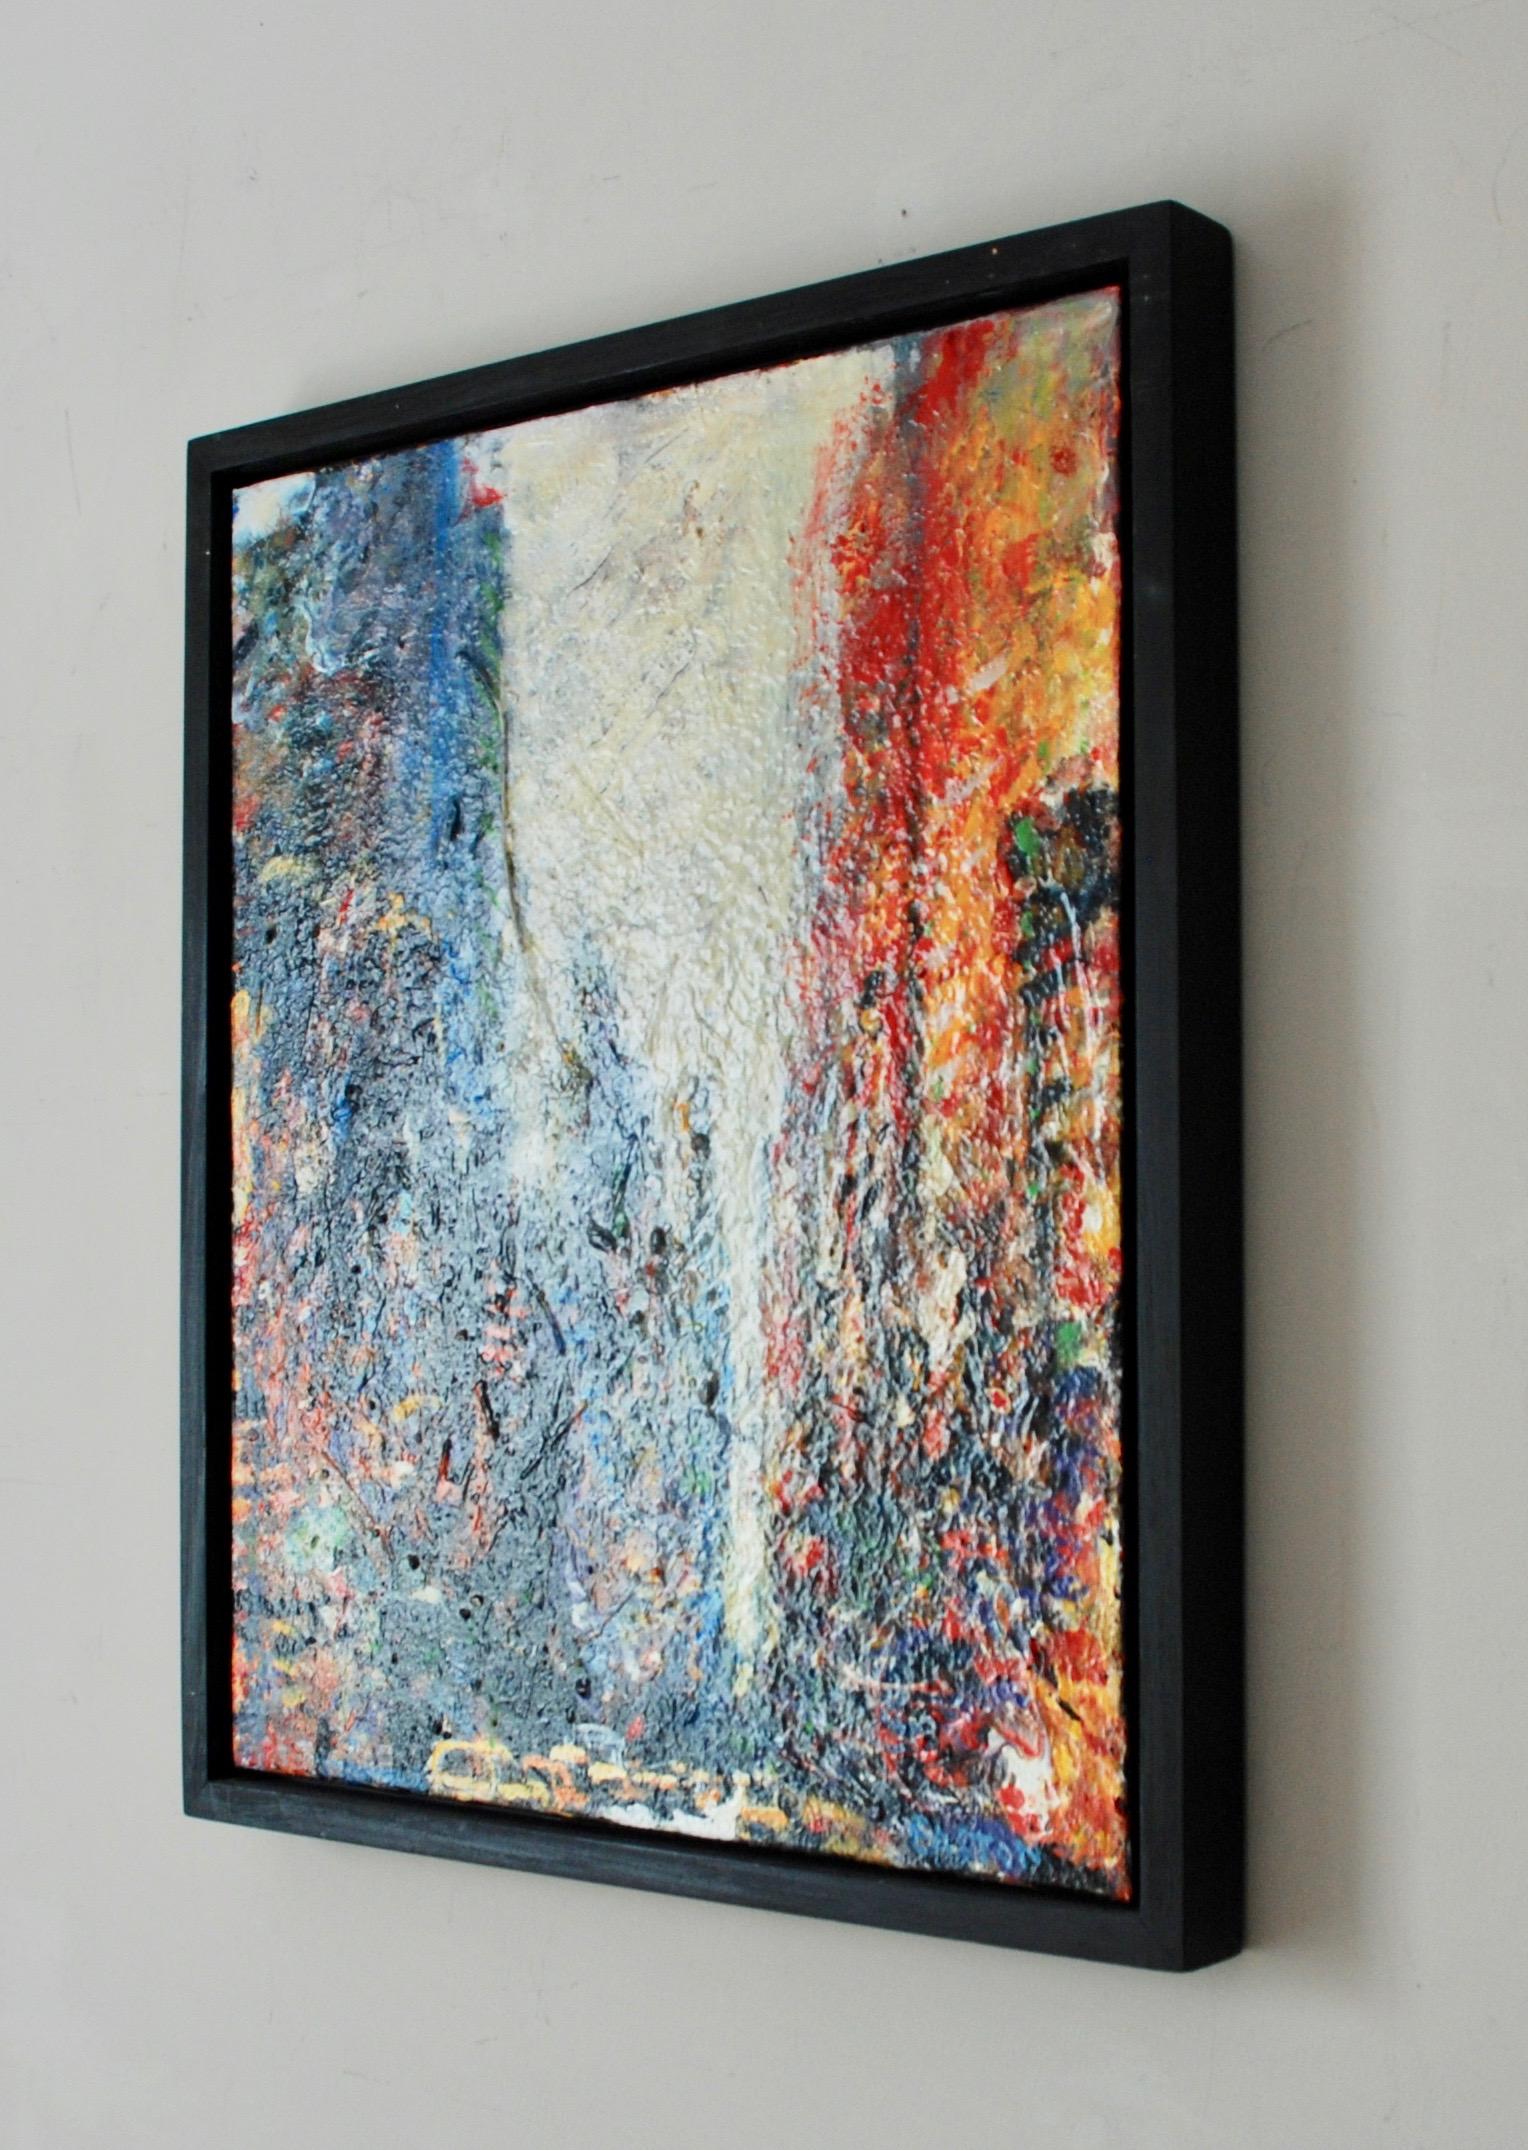 Who What Where When - Abstract Painting by Susan Easton Burns